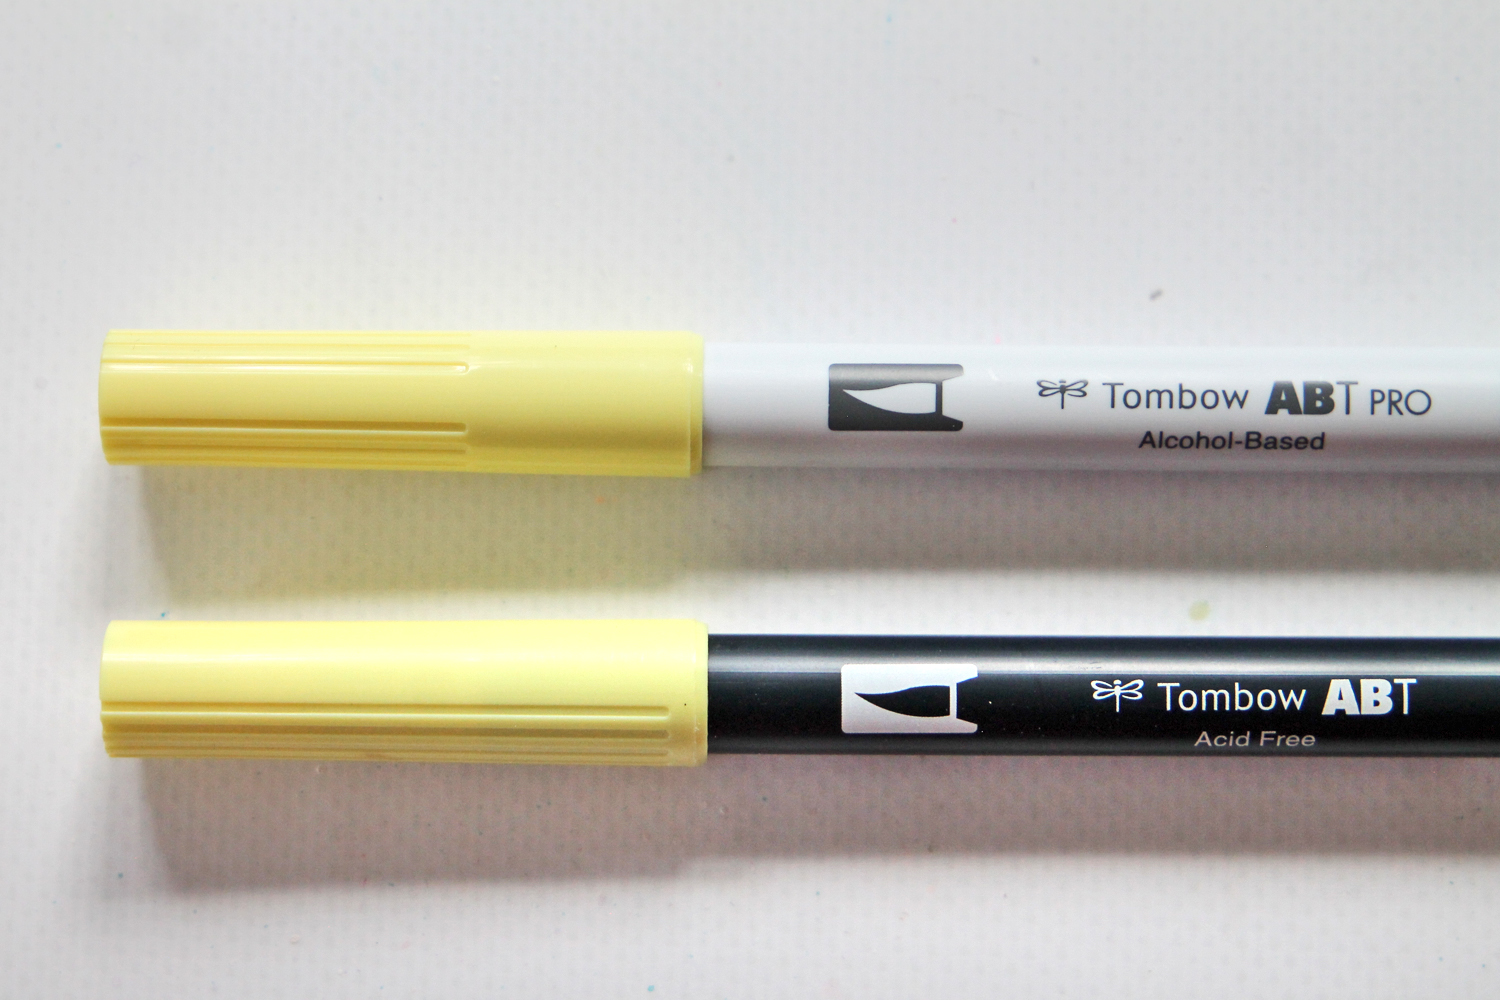 Tombow ABT Pro Alcohol Markers - Yellow Tones, Set of 5